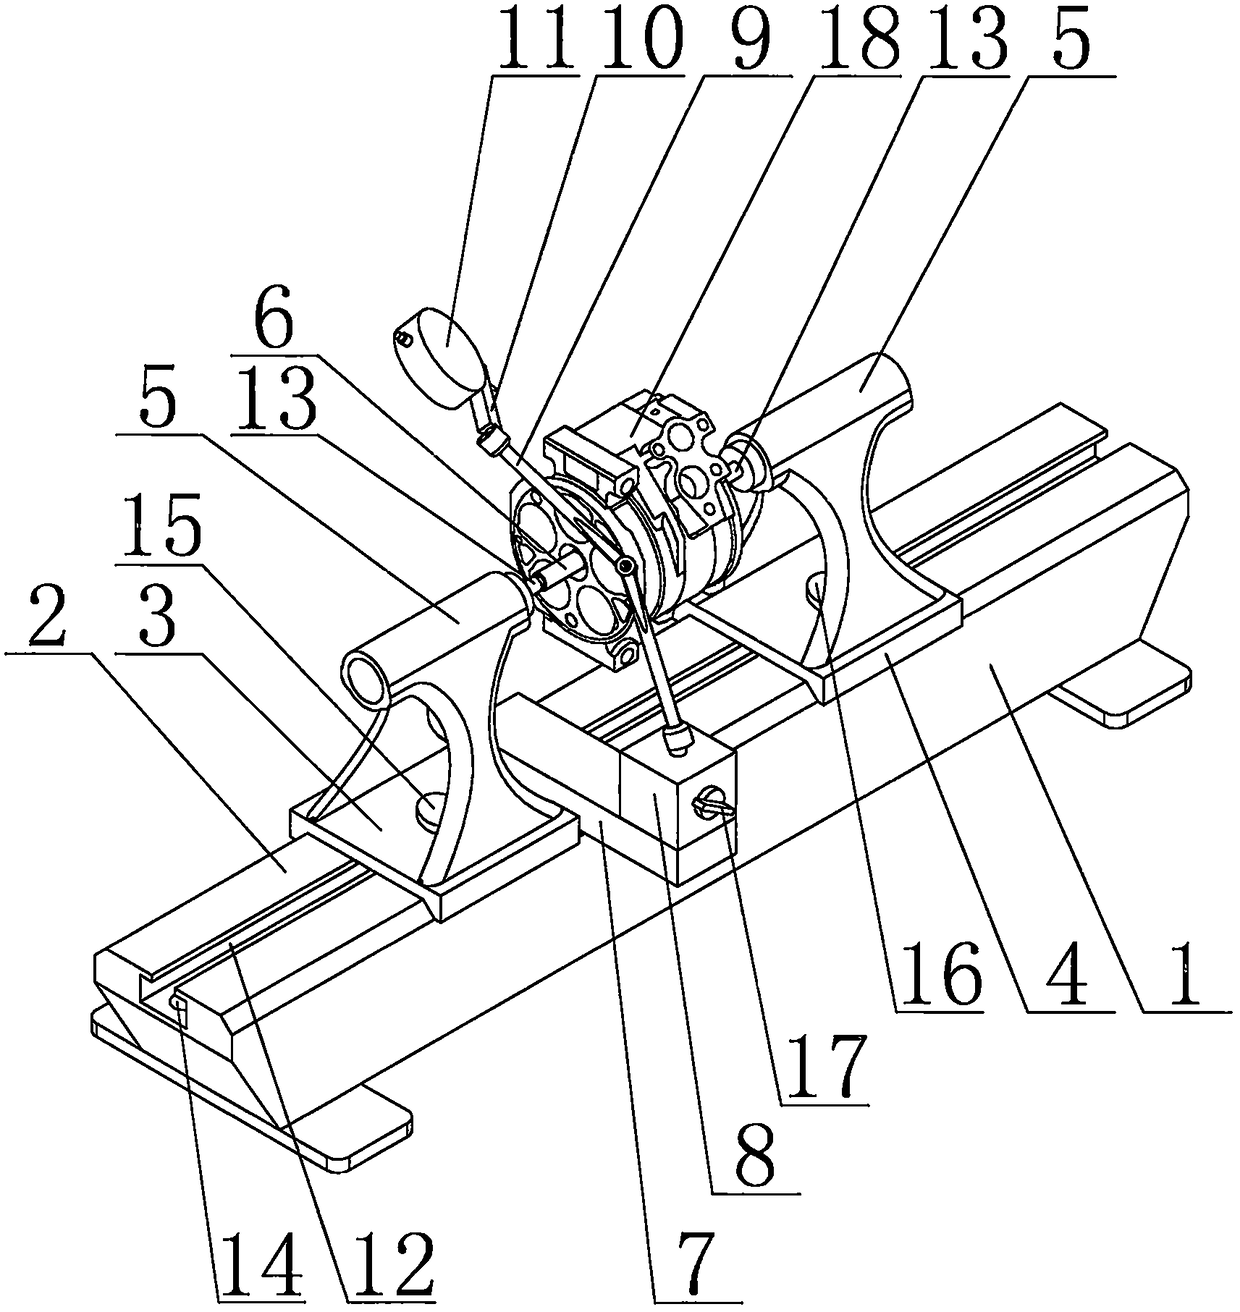 Device for measuring coaxiality of central holes of front and rear cylinder bodies